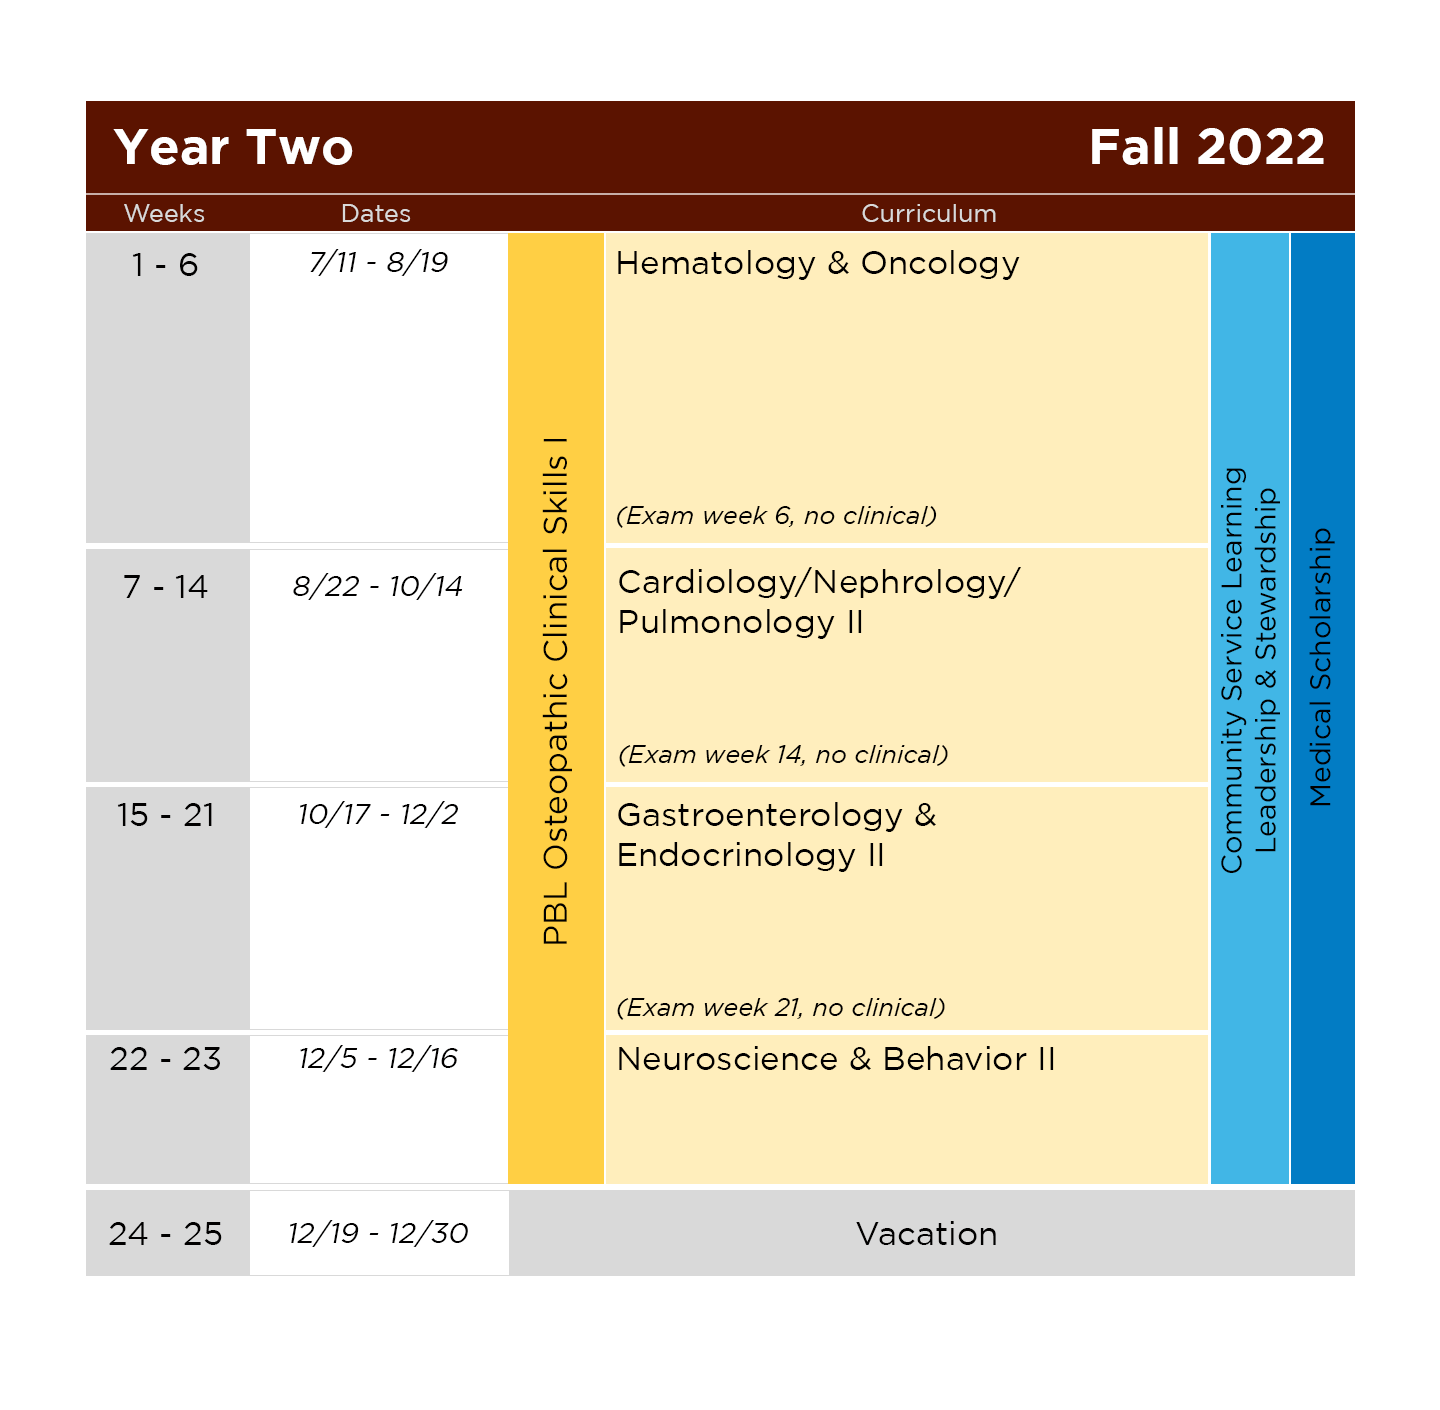 A sample of the schedule for PBL Year Two Fall 2022